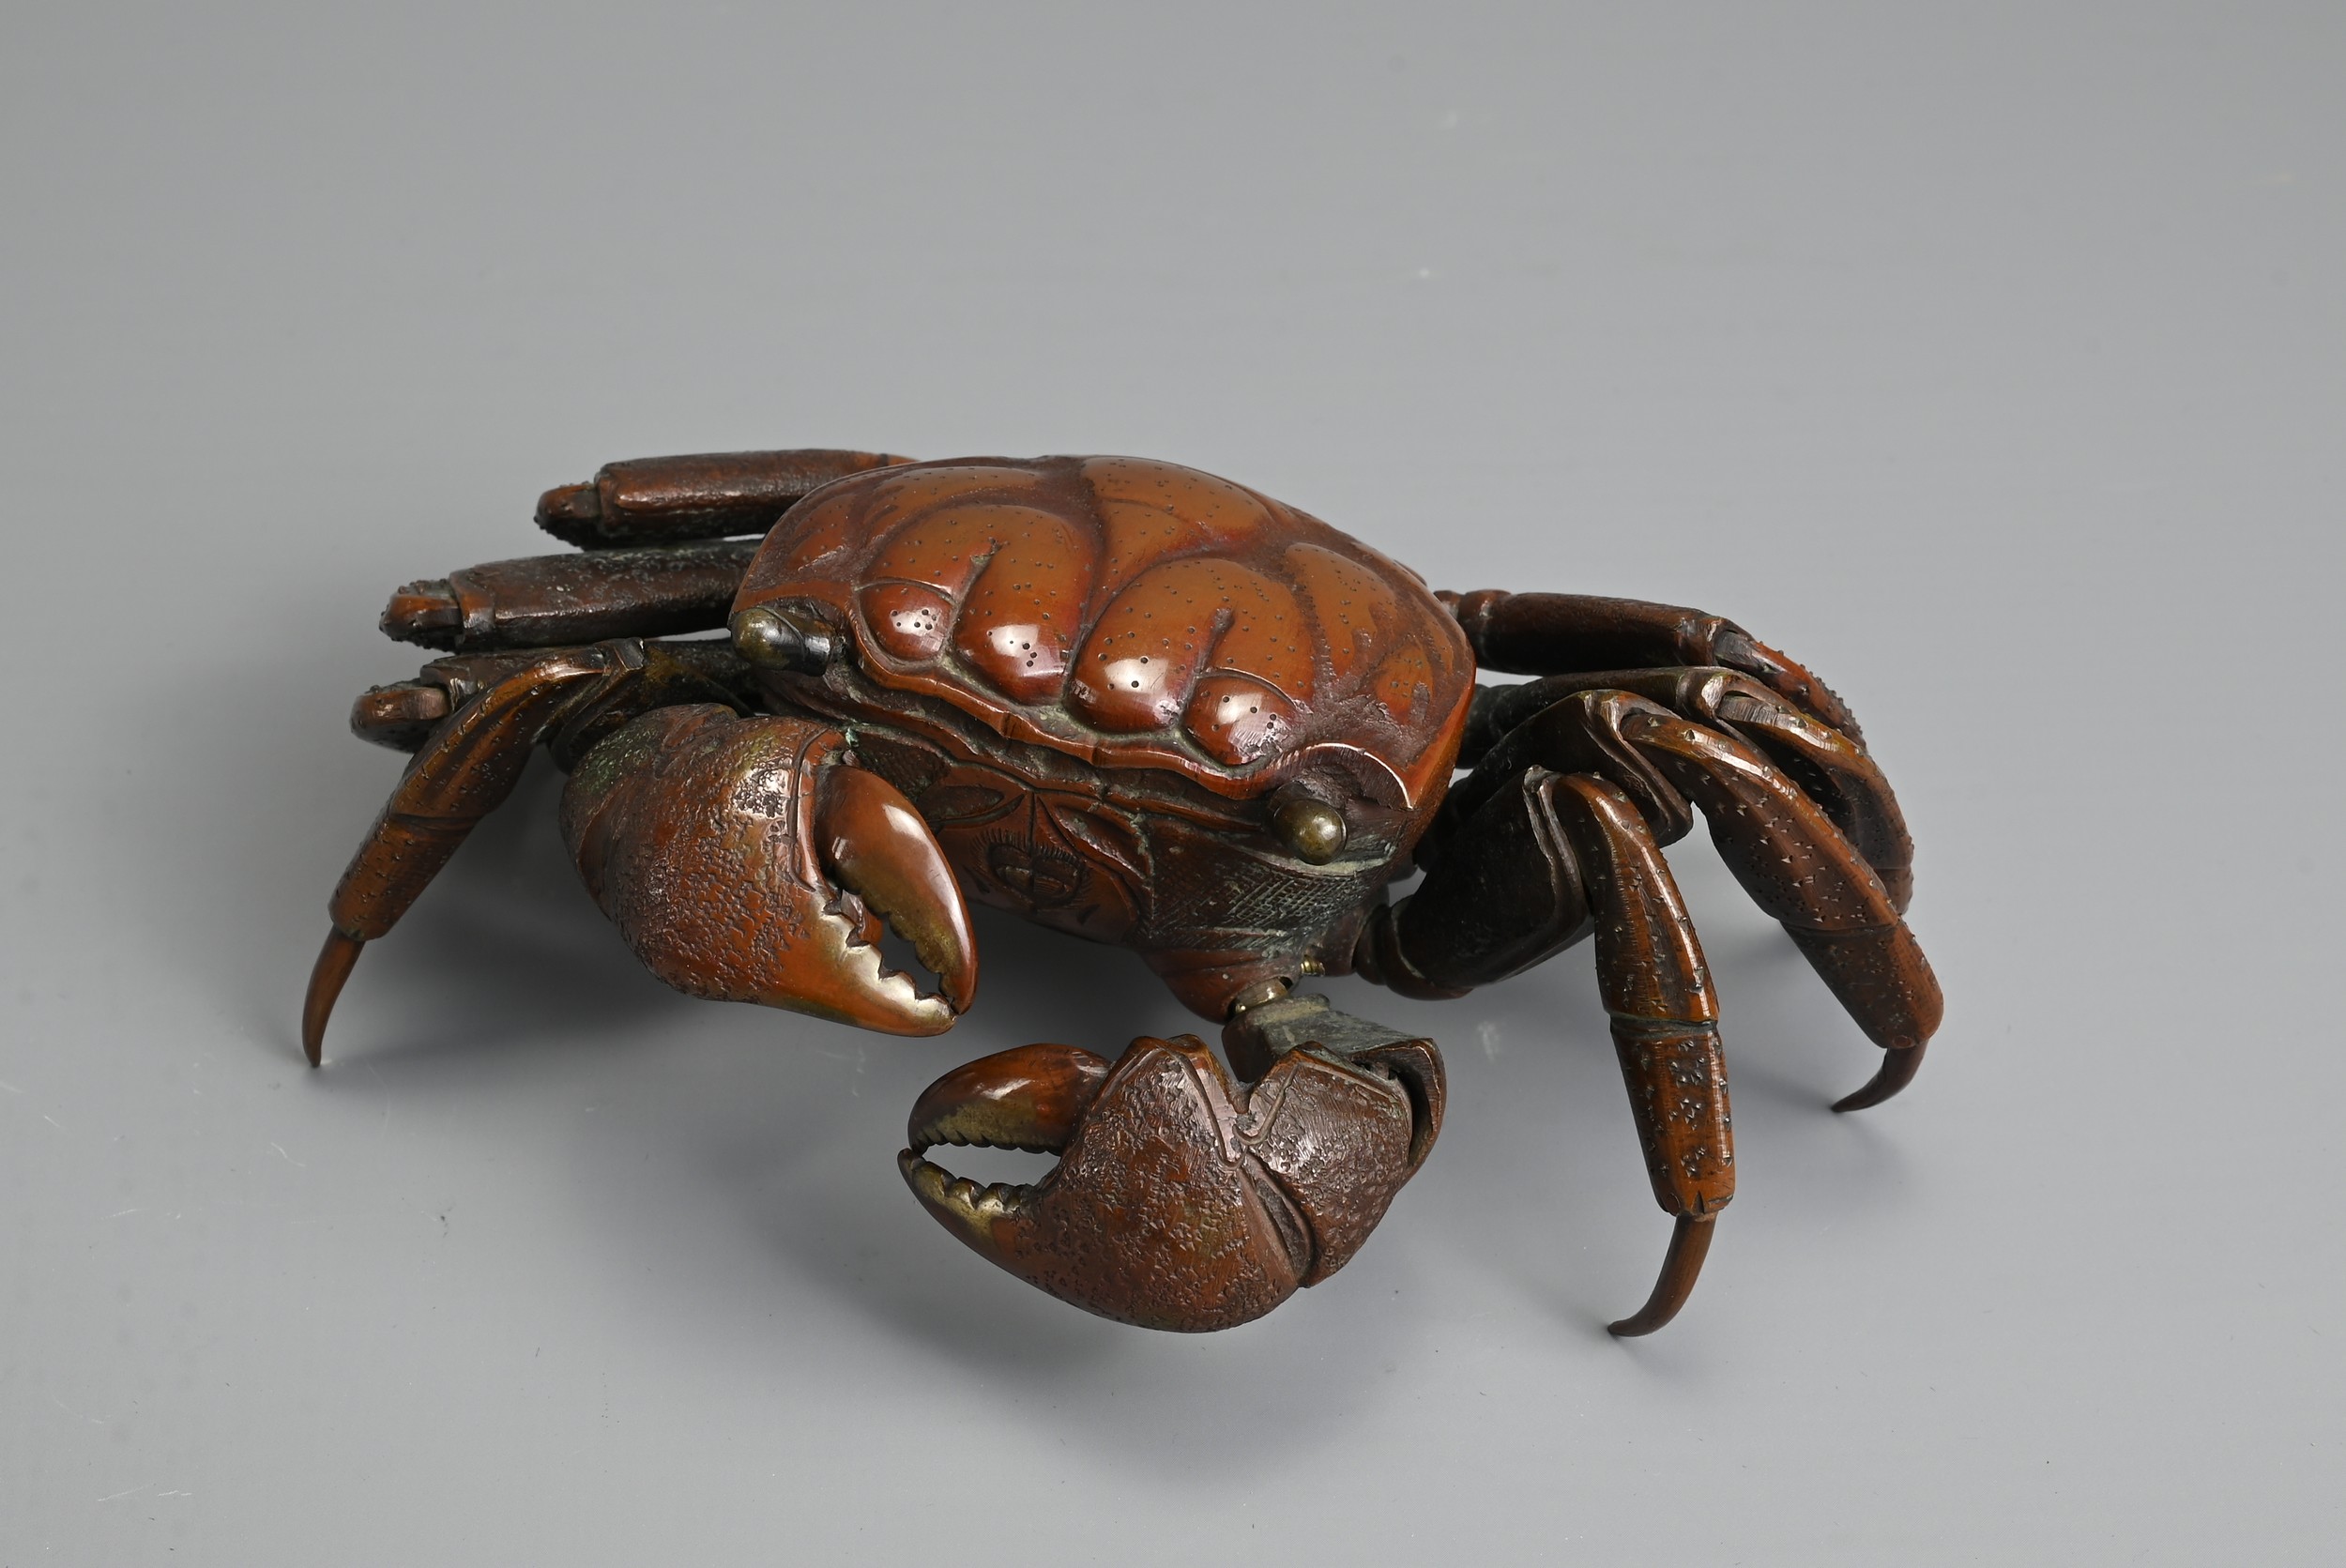 A JAPANESE MEIJI PERIOD (1868-1912) BRONZE JIZAI OKIMONO OF A CRAB. With articulated legs, claws and - Image 2 of 7